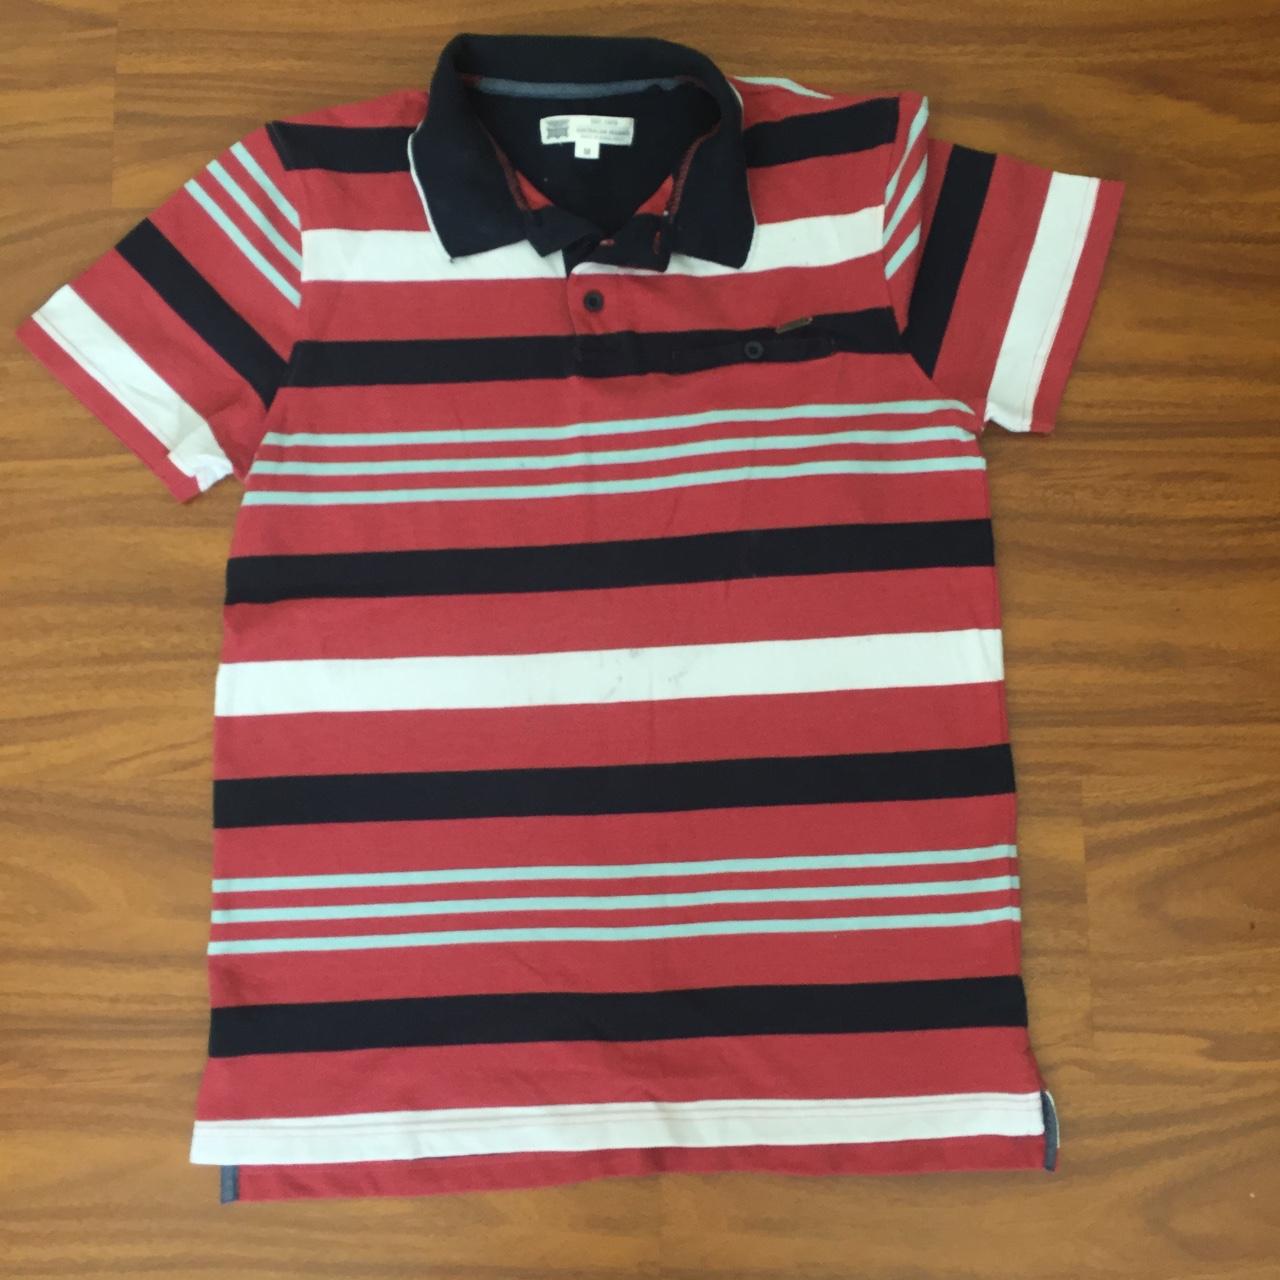 Product Image 1 - Rivers red white and black